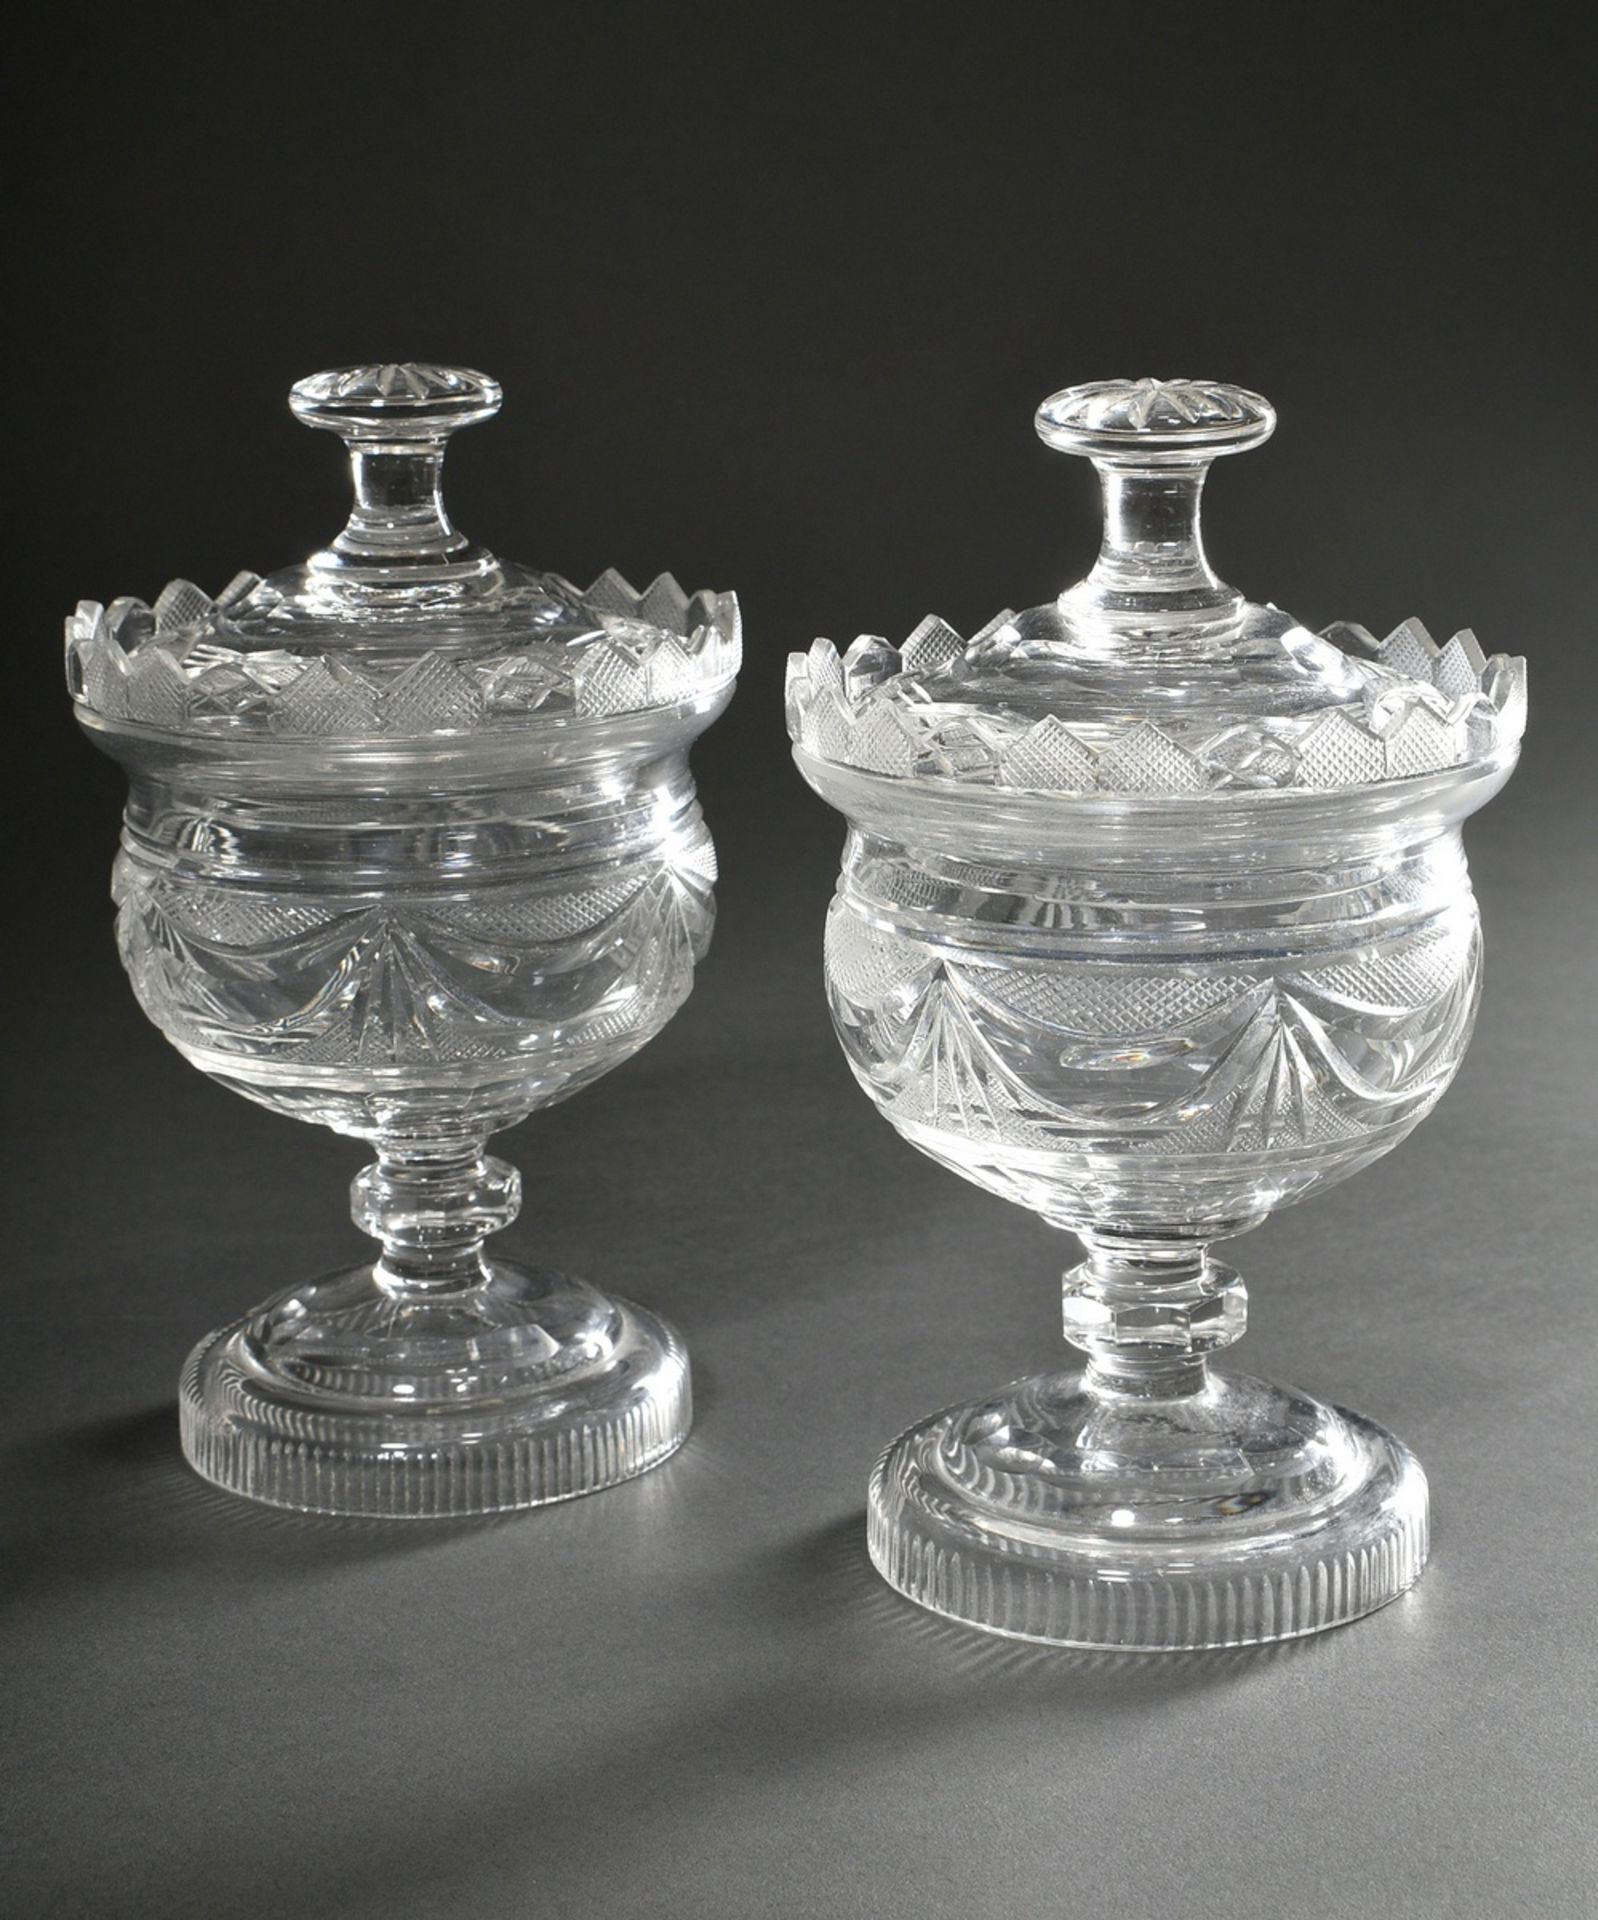 Pair of crystal lidded vessels with rich cut, garland decoration, 19th century, h. 19cm, rim crowns